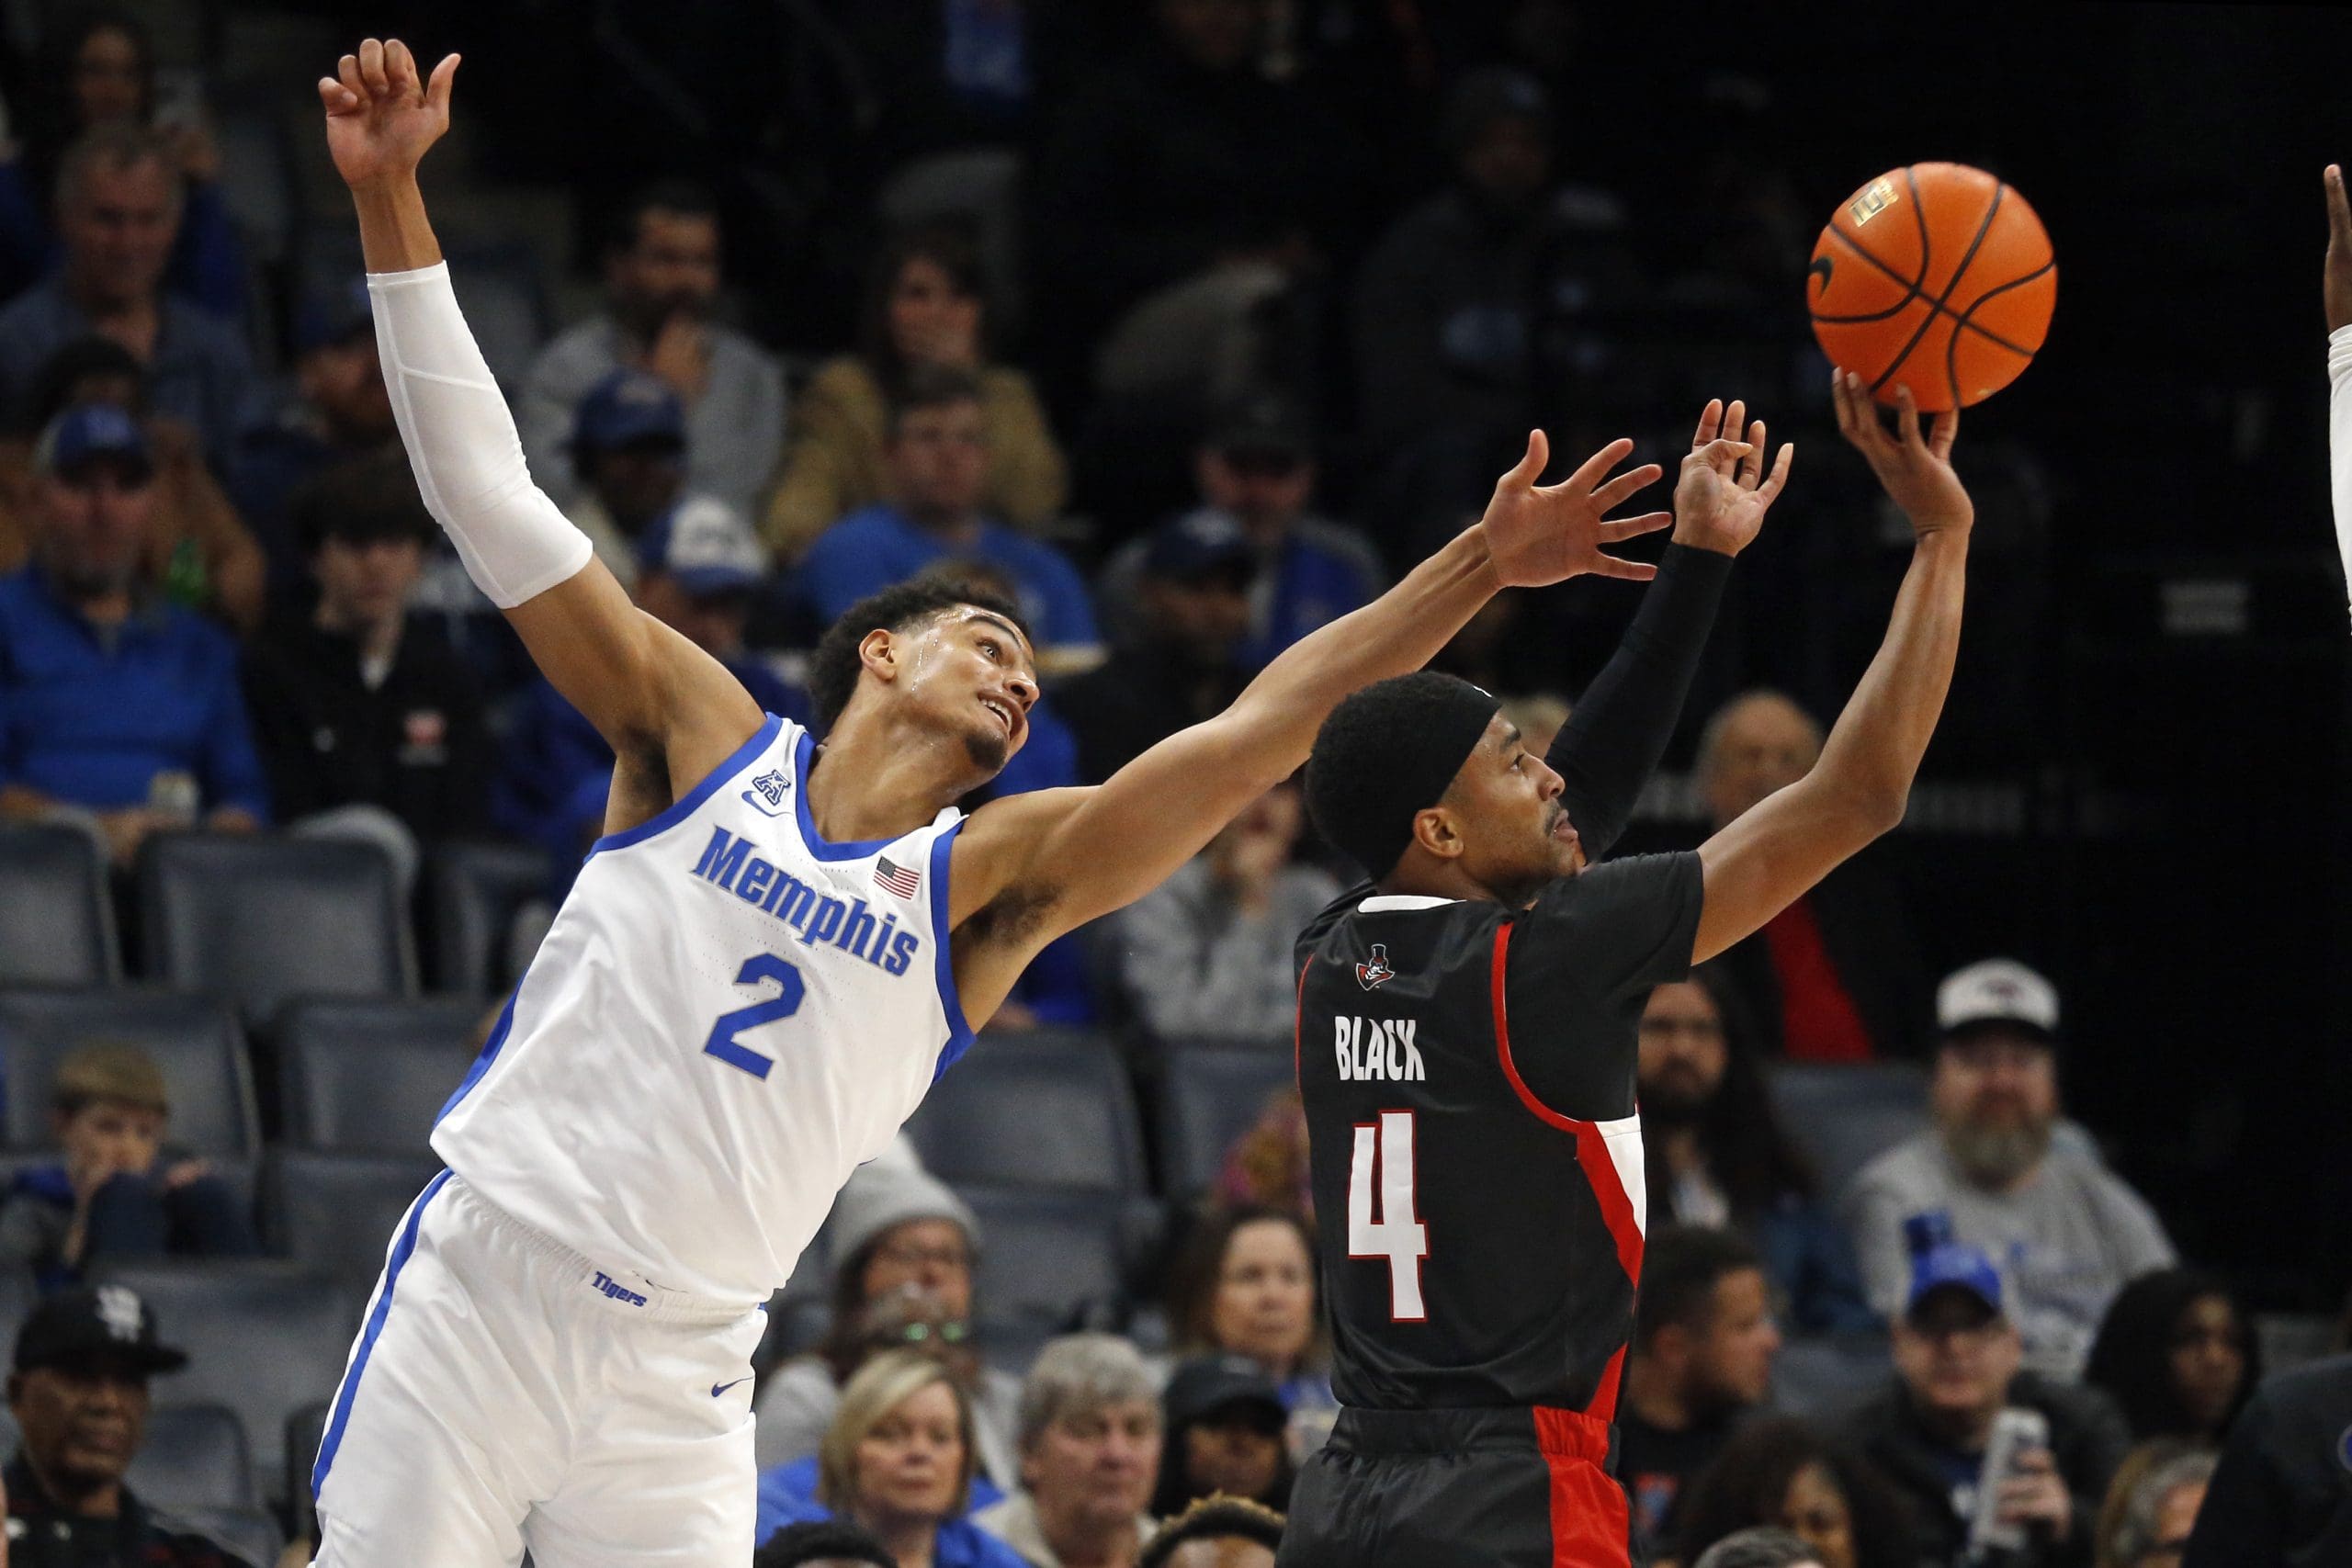 The Memphis Tigers are the HOTTEST team in College Basketball